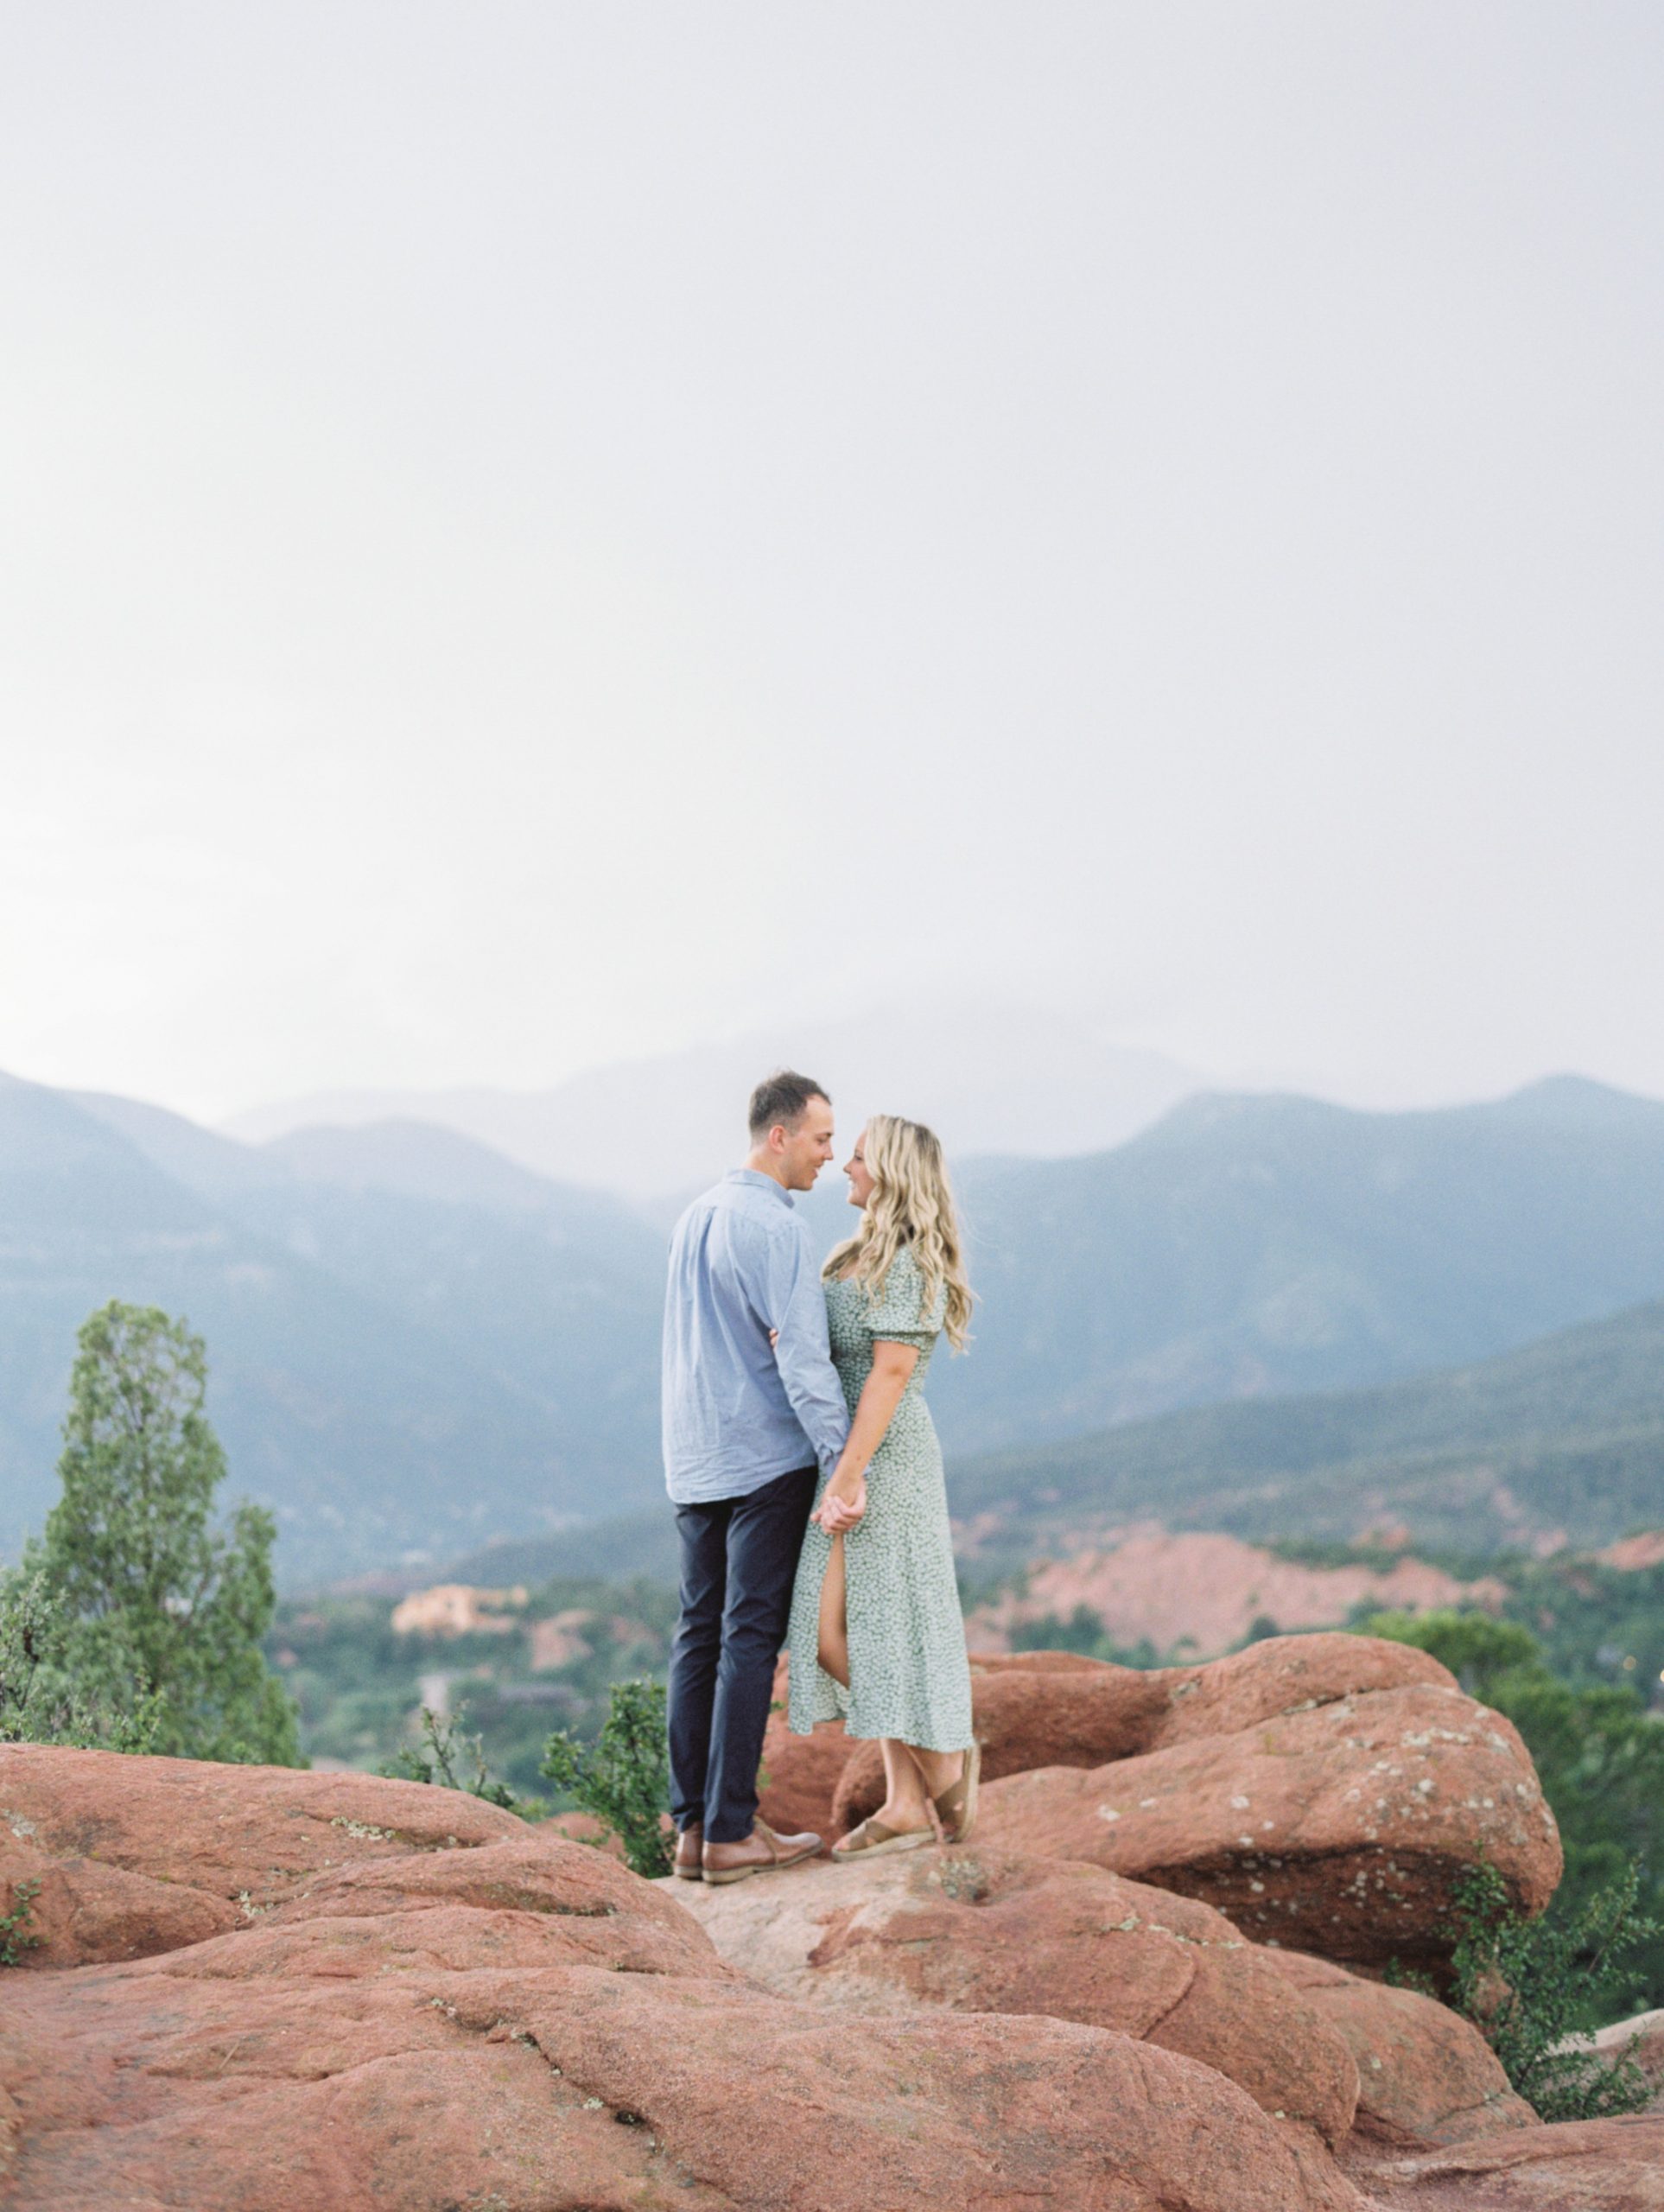 garden of the gods engagement session colorado springs photographer cat murphy photography